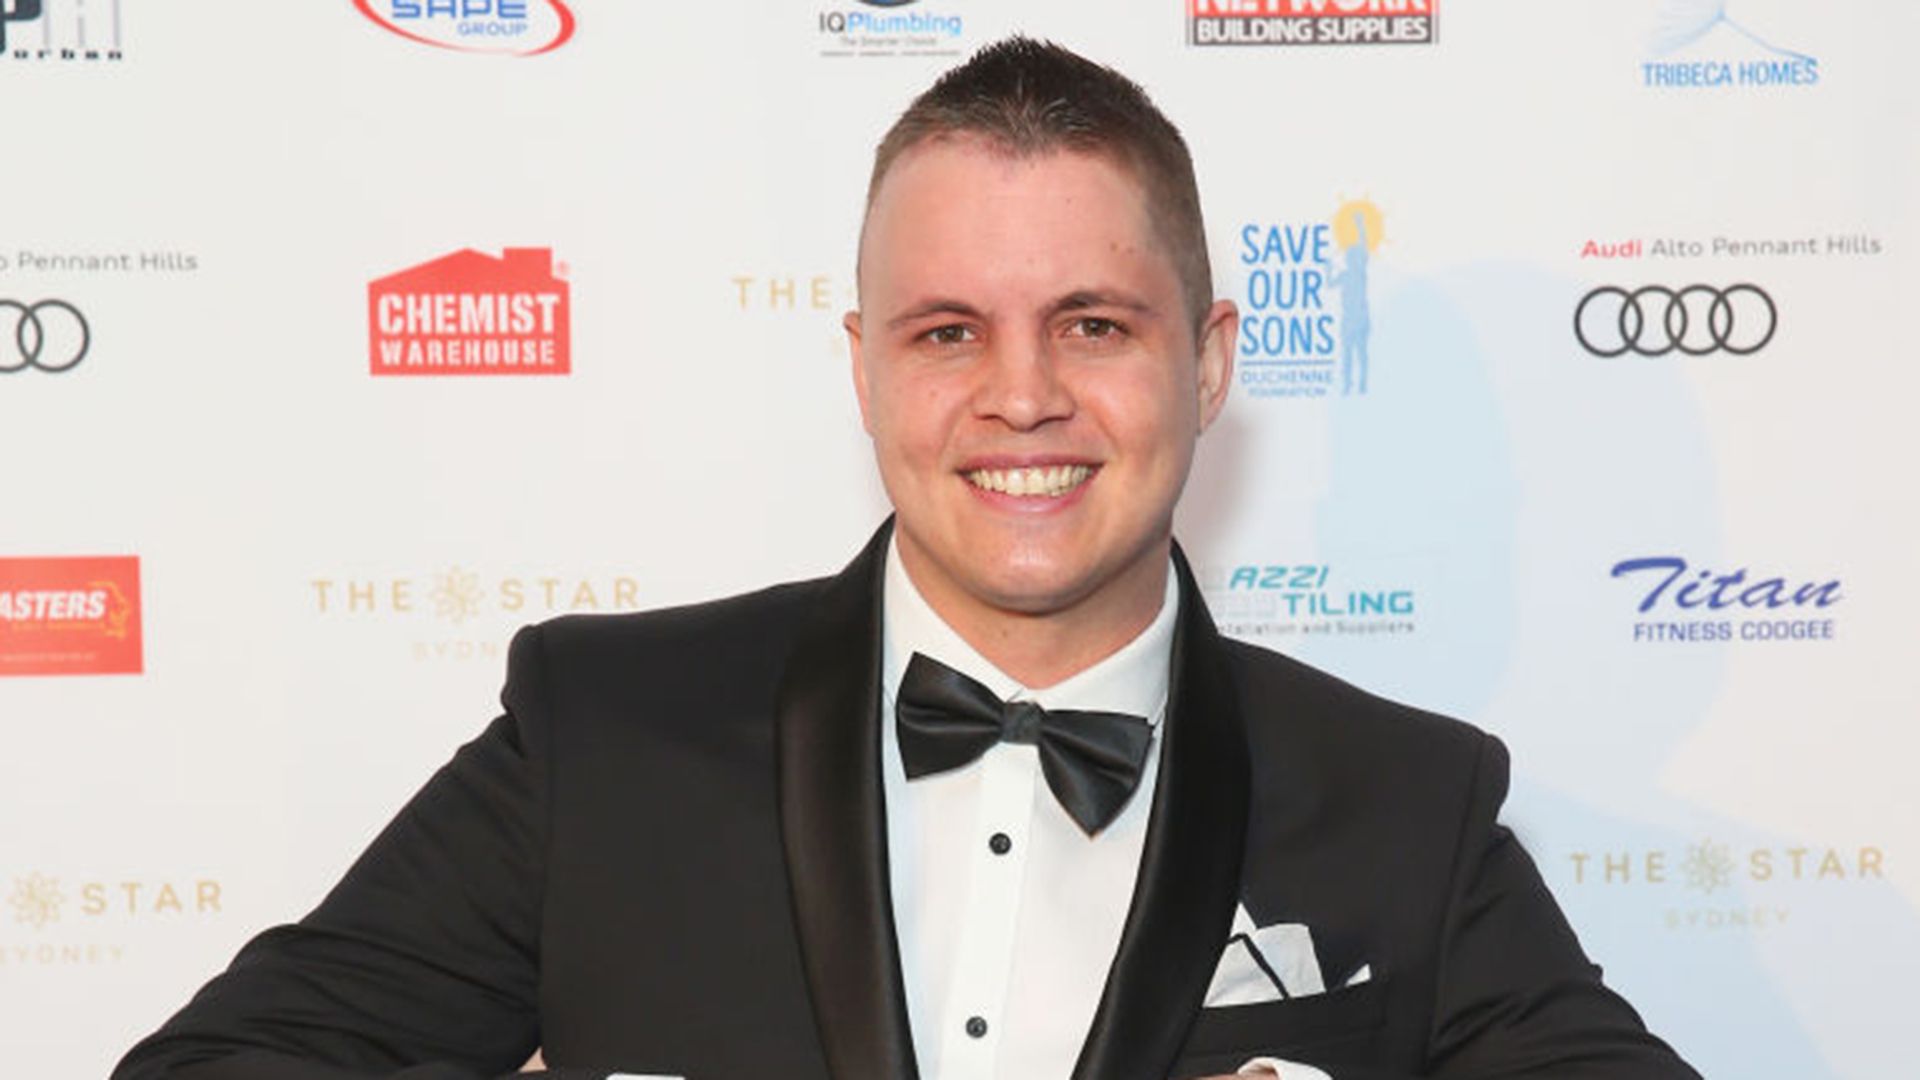 Dannii Minogue and Mel B share heartache after Home and Away star Johnny Ruffo dies aged 35